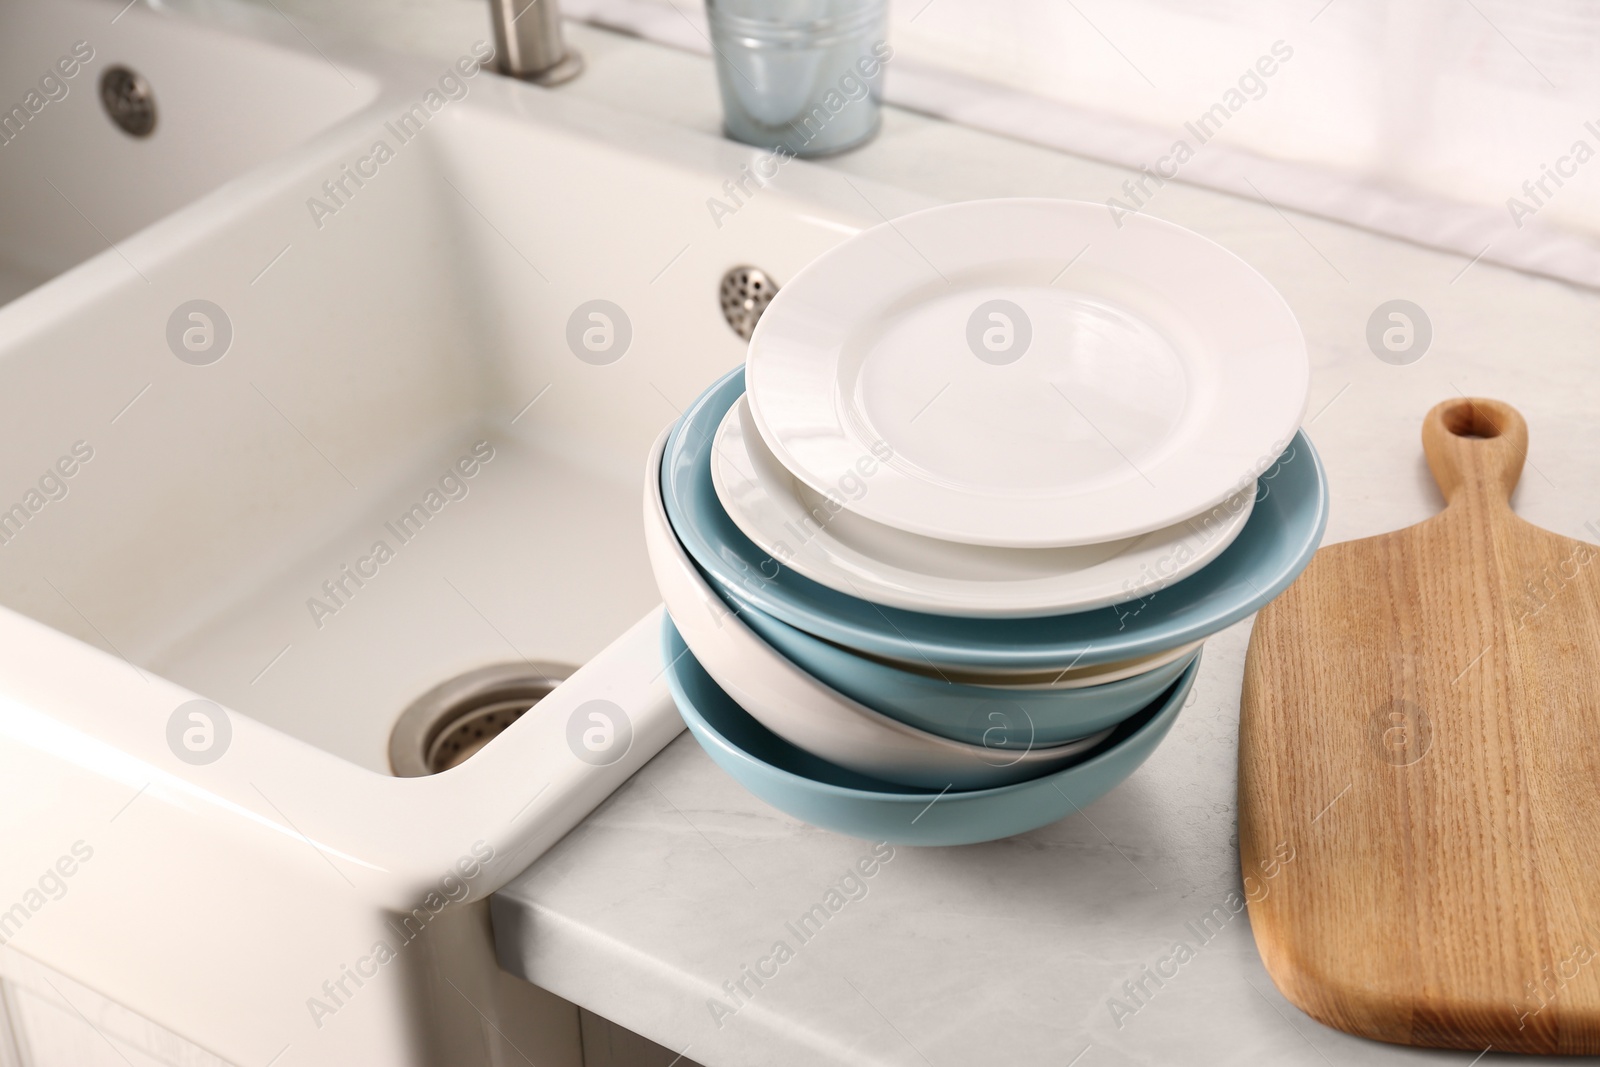 Photo of Clean tableware on light countertop near sink in kitchen